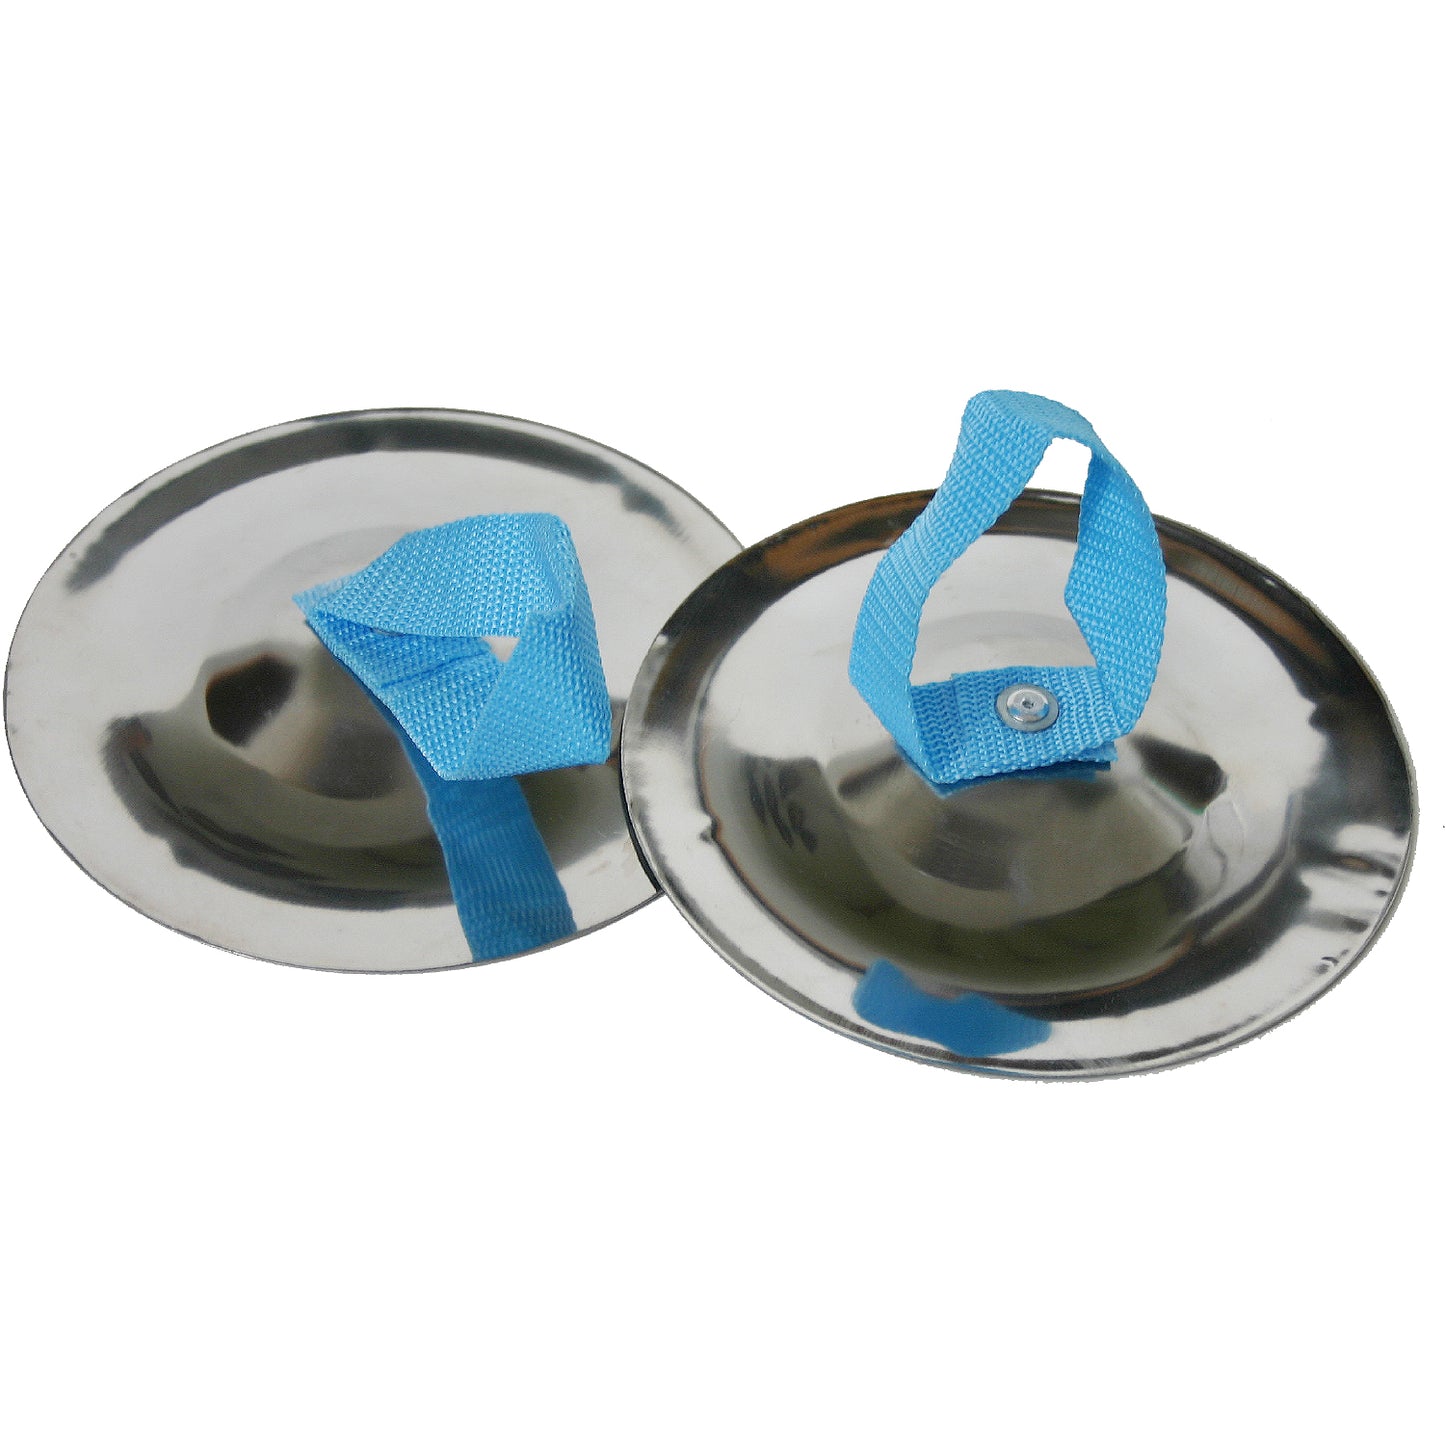 Handheld Cymbals Stainless (15 cm, Pair)